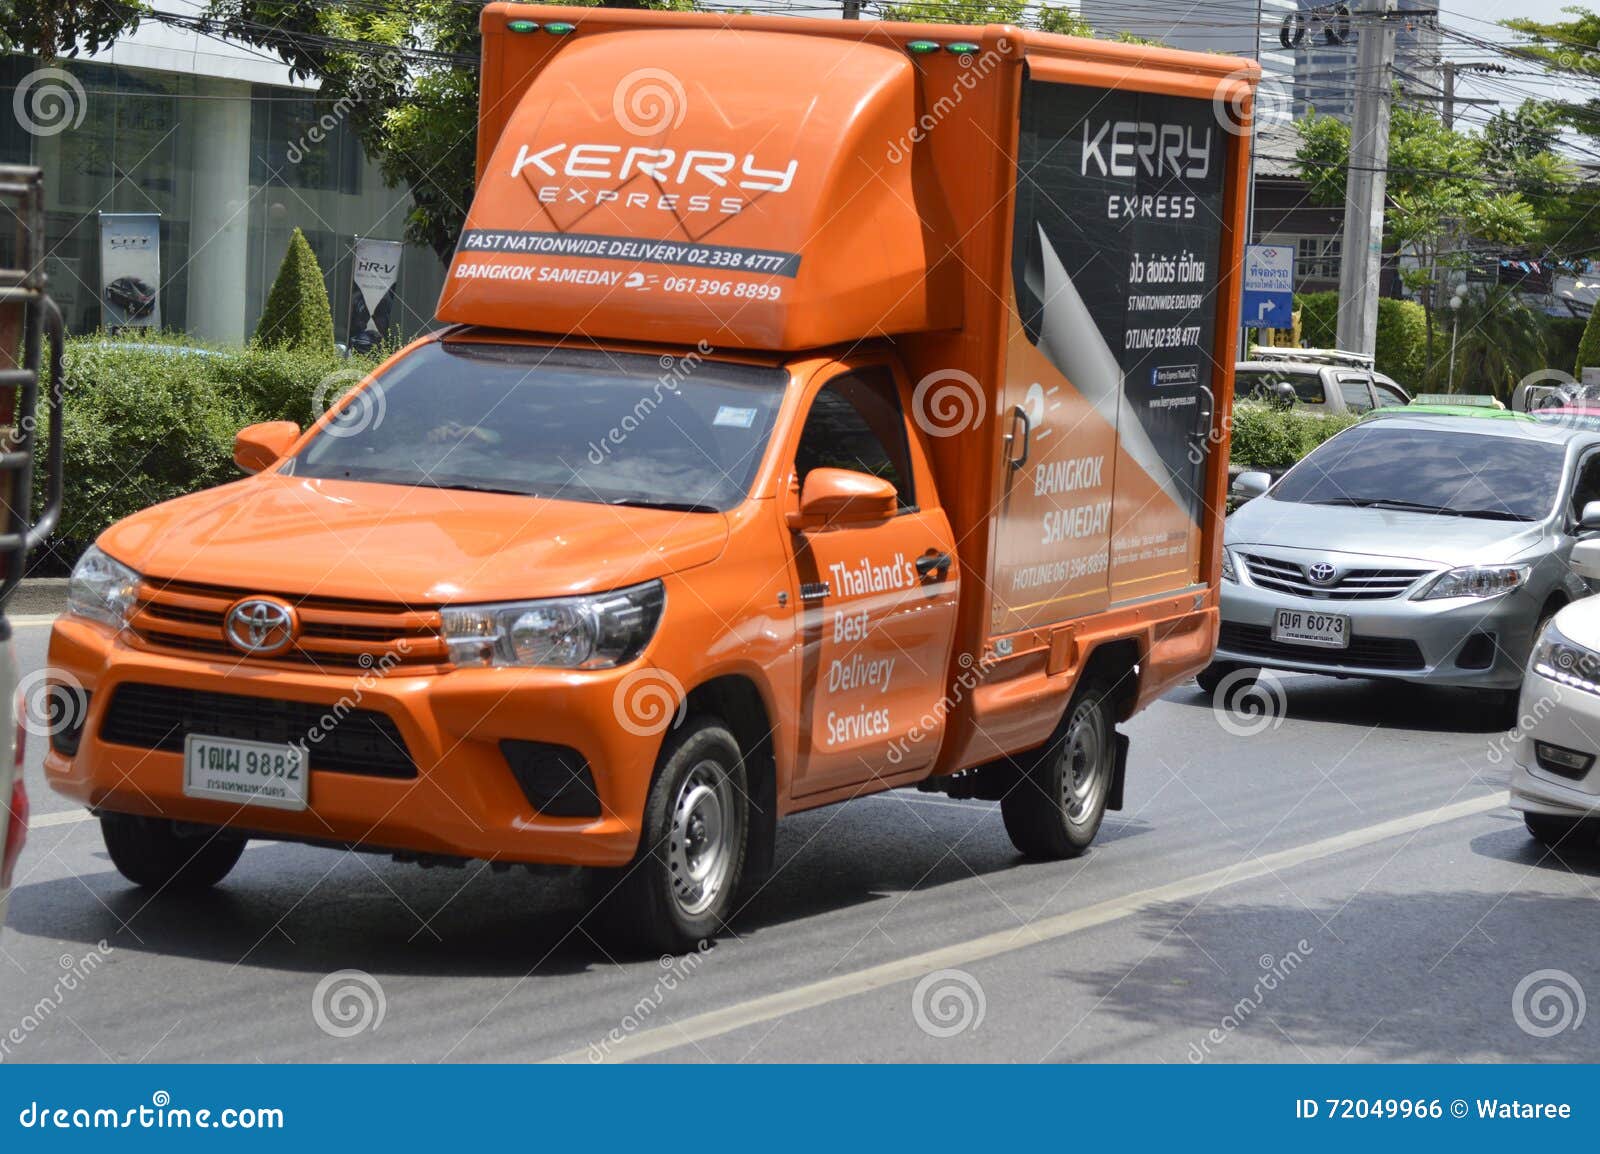 Kerry Express Parcel Delivery Service Pickup Truck ...